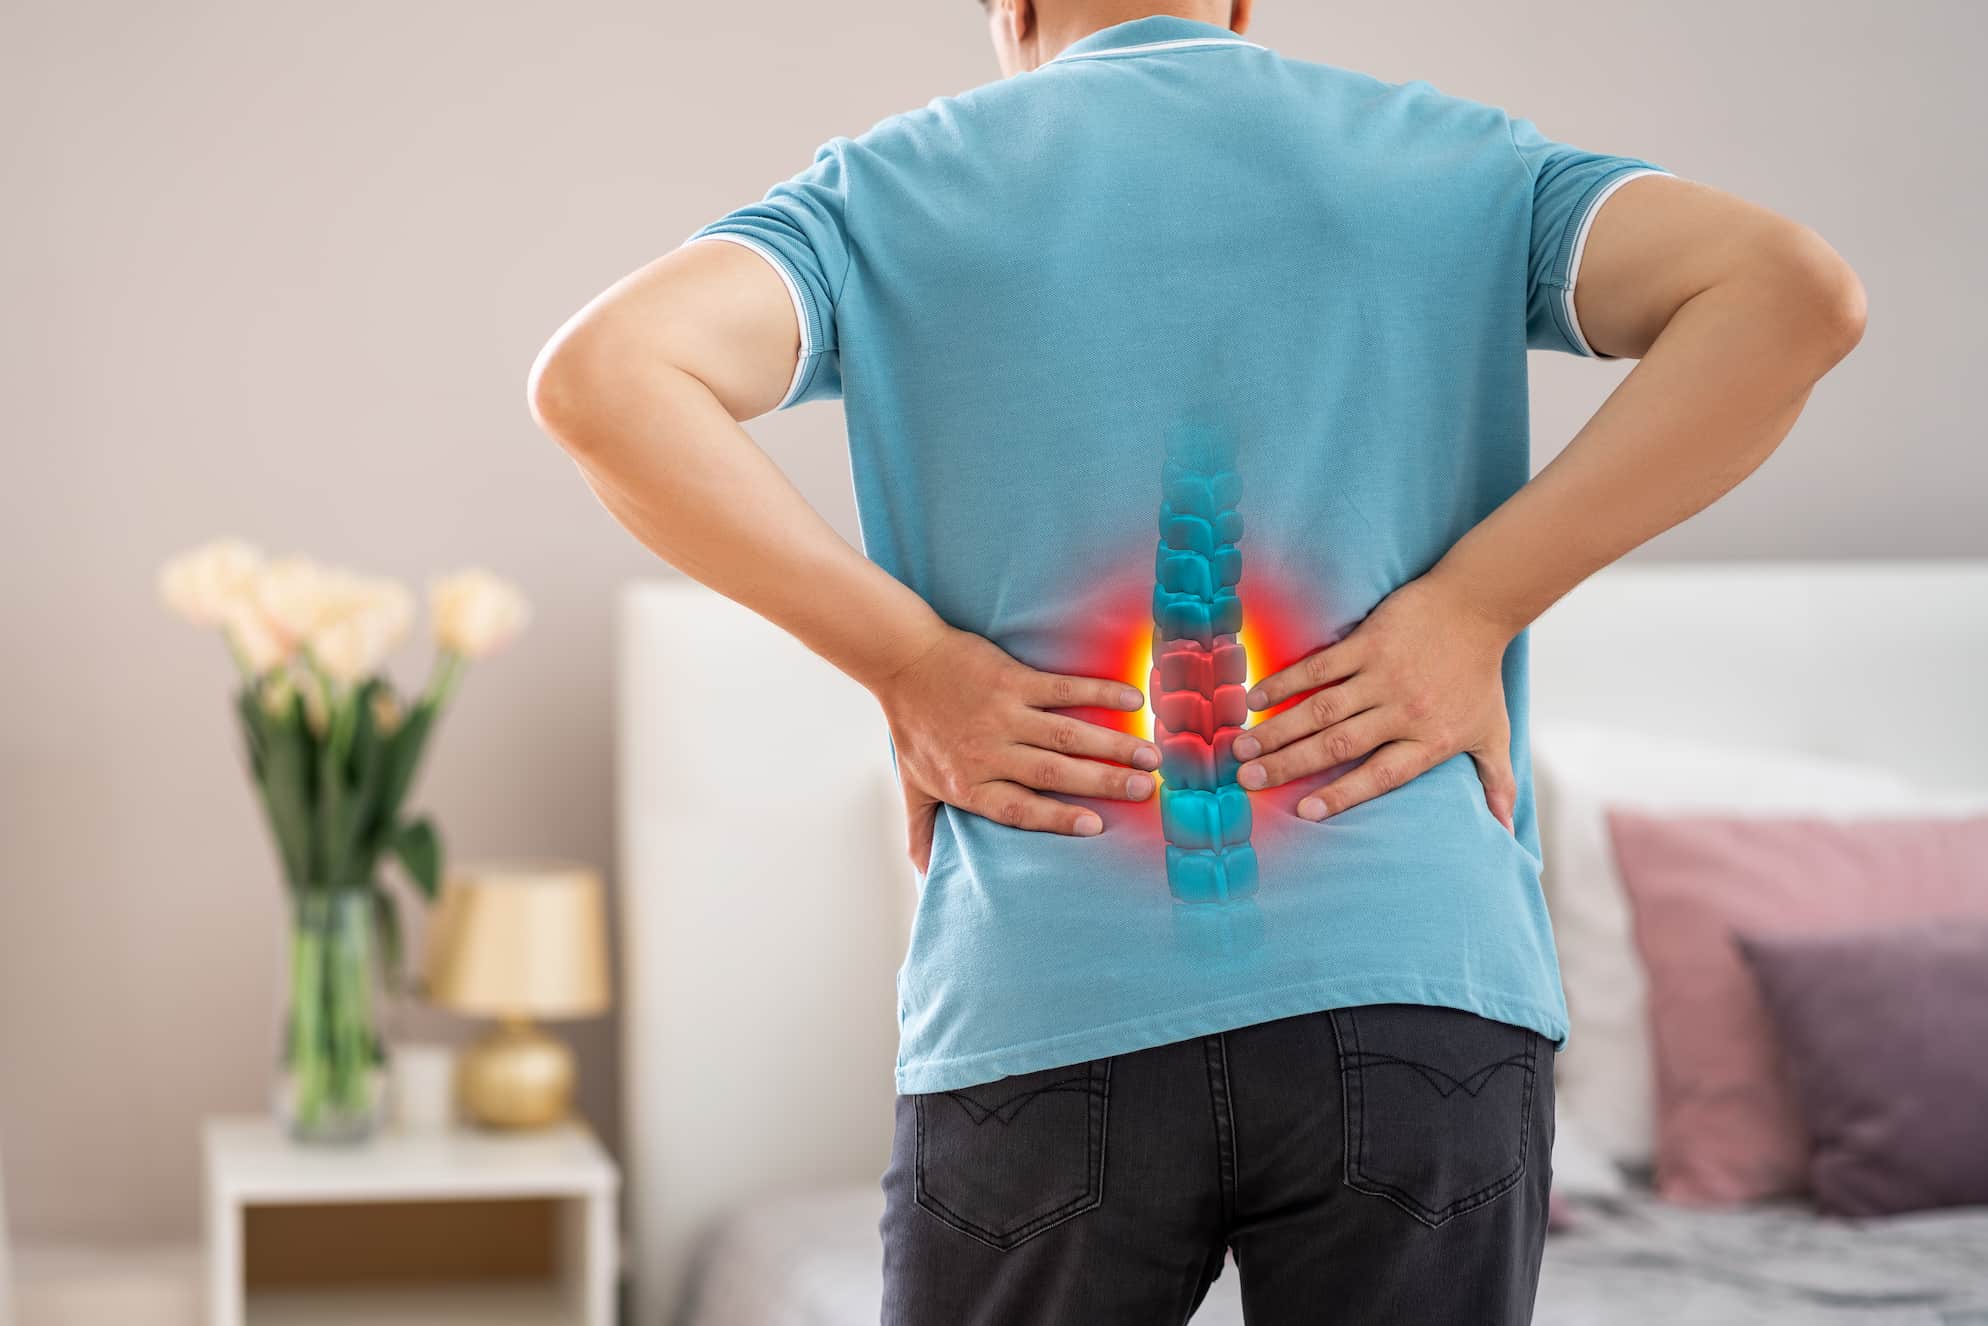 the benefits of micro lumbar discectomy for back pain relief